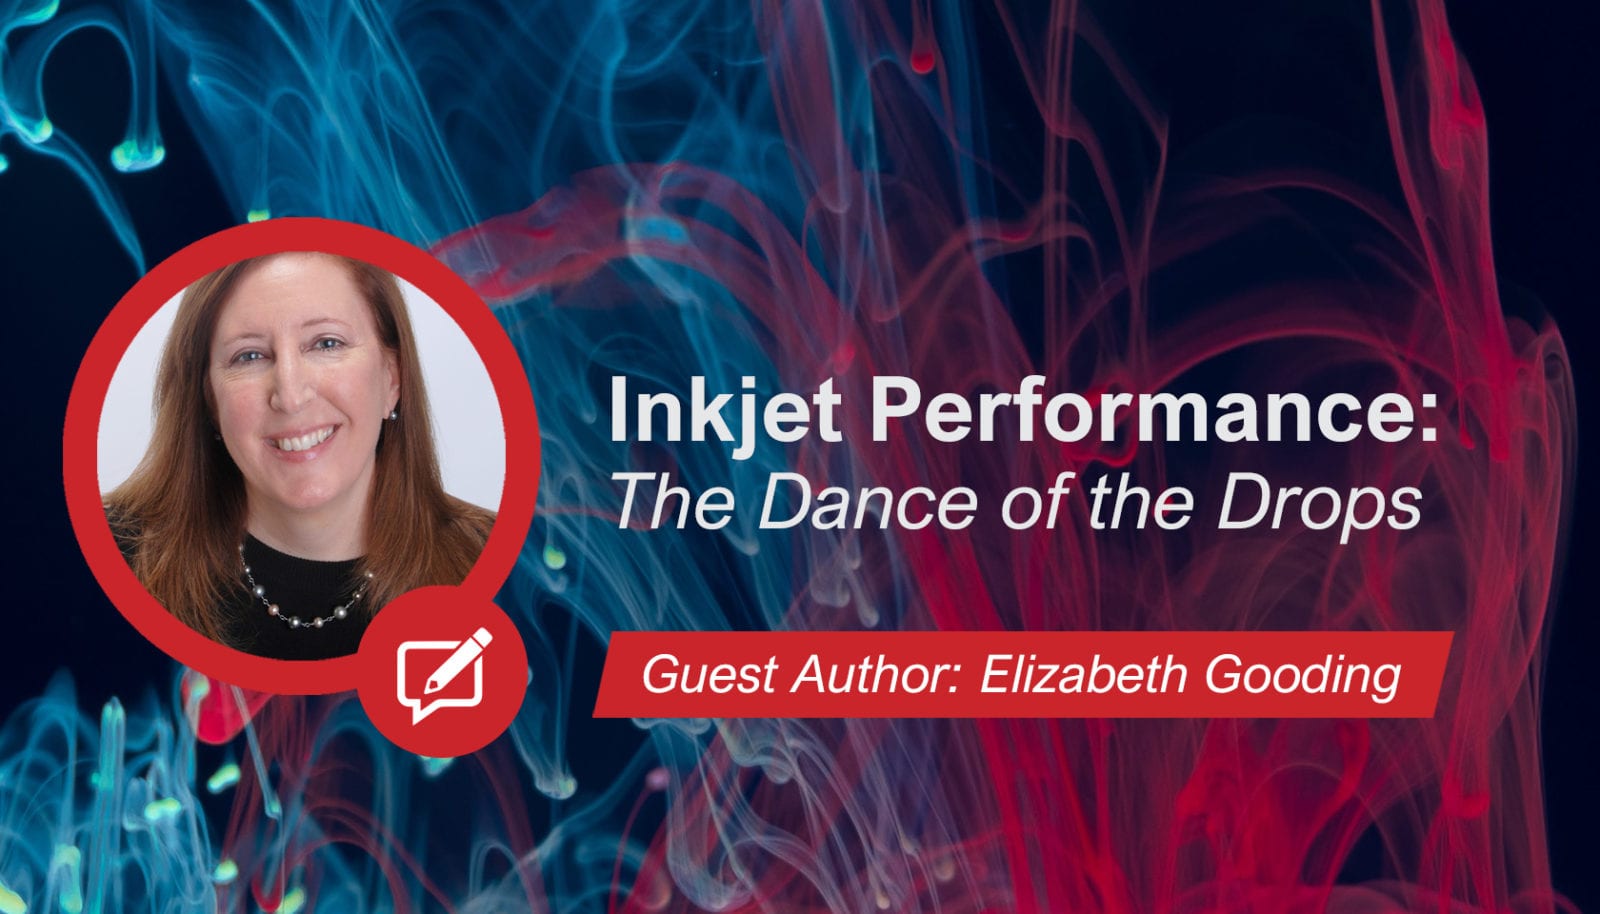 Inkjet Performance: The Dance of the Drops